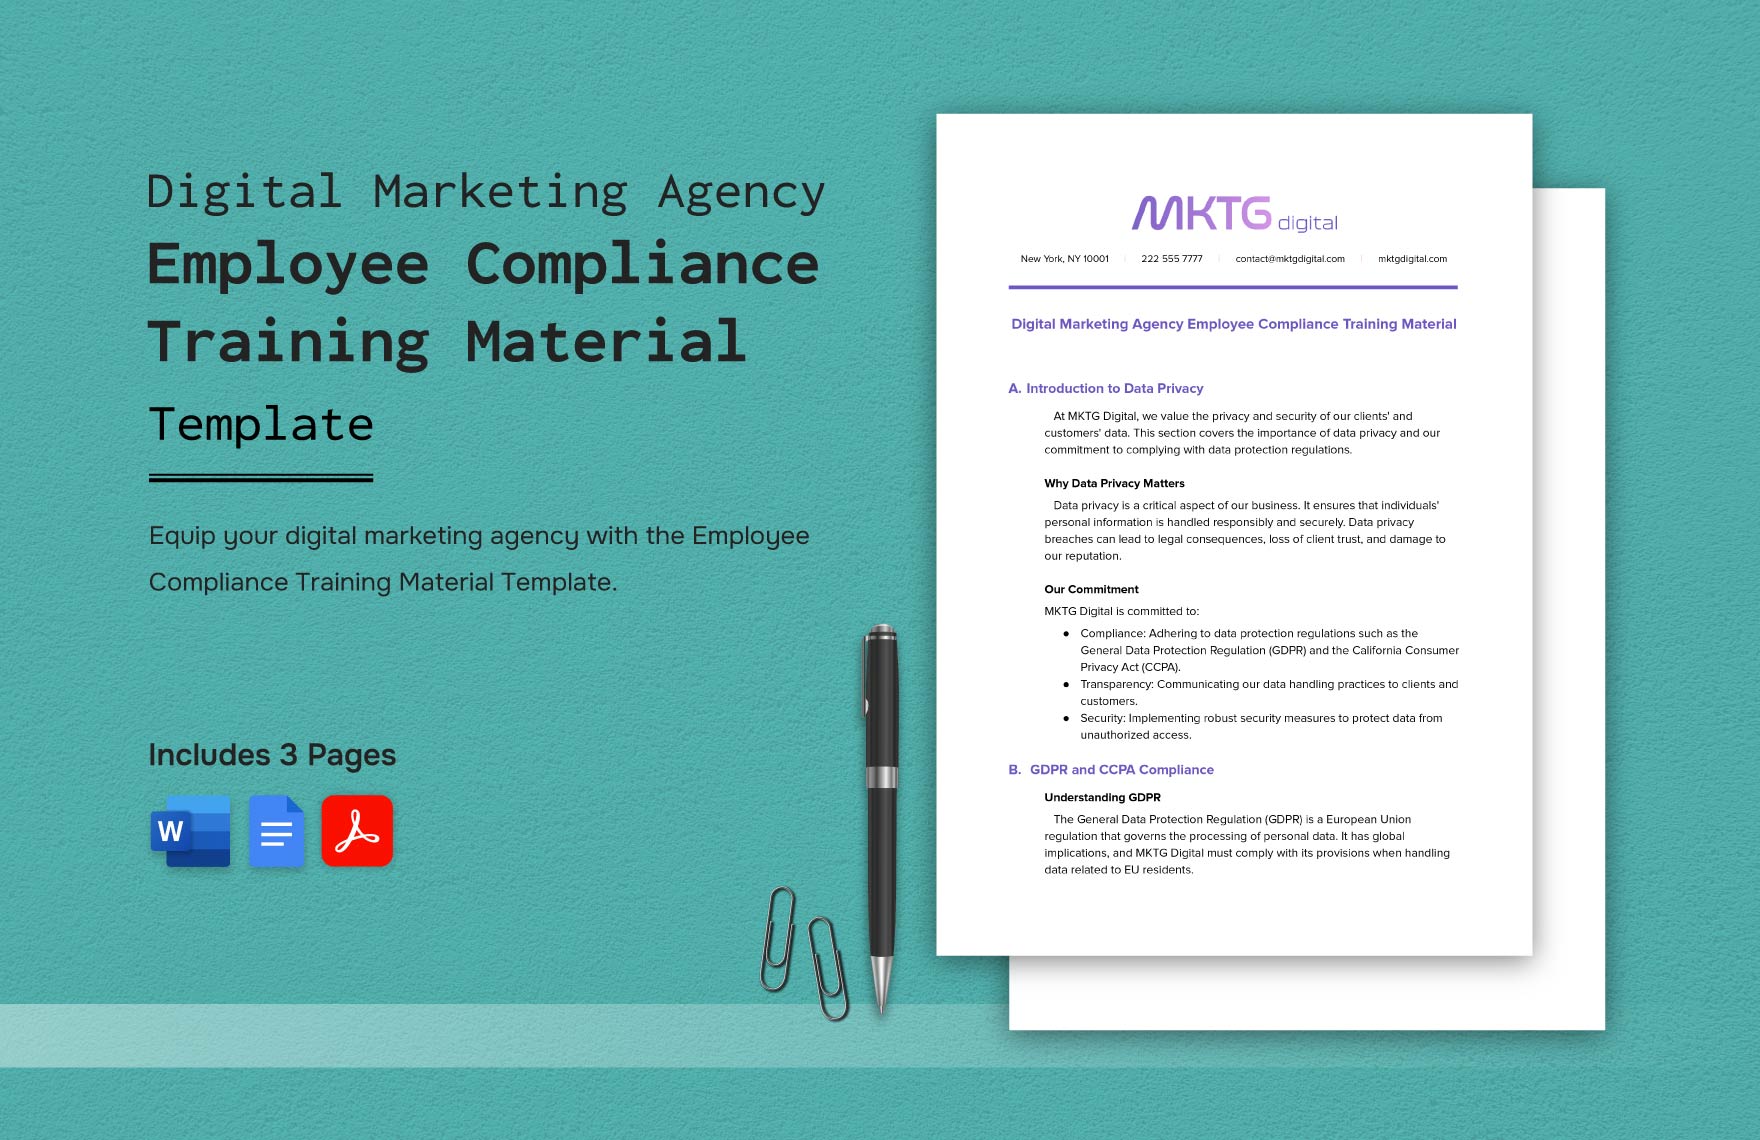 Digital Marketing Agency Employee Compliance Training Material Template in Word, Google Docs, PDF